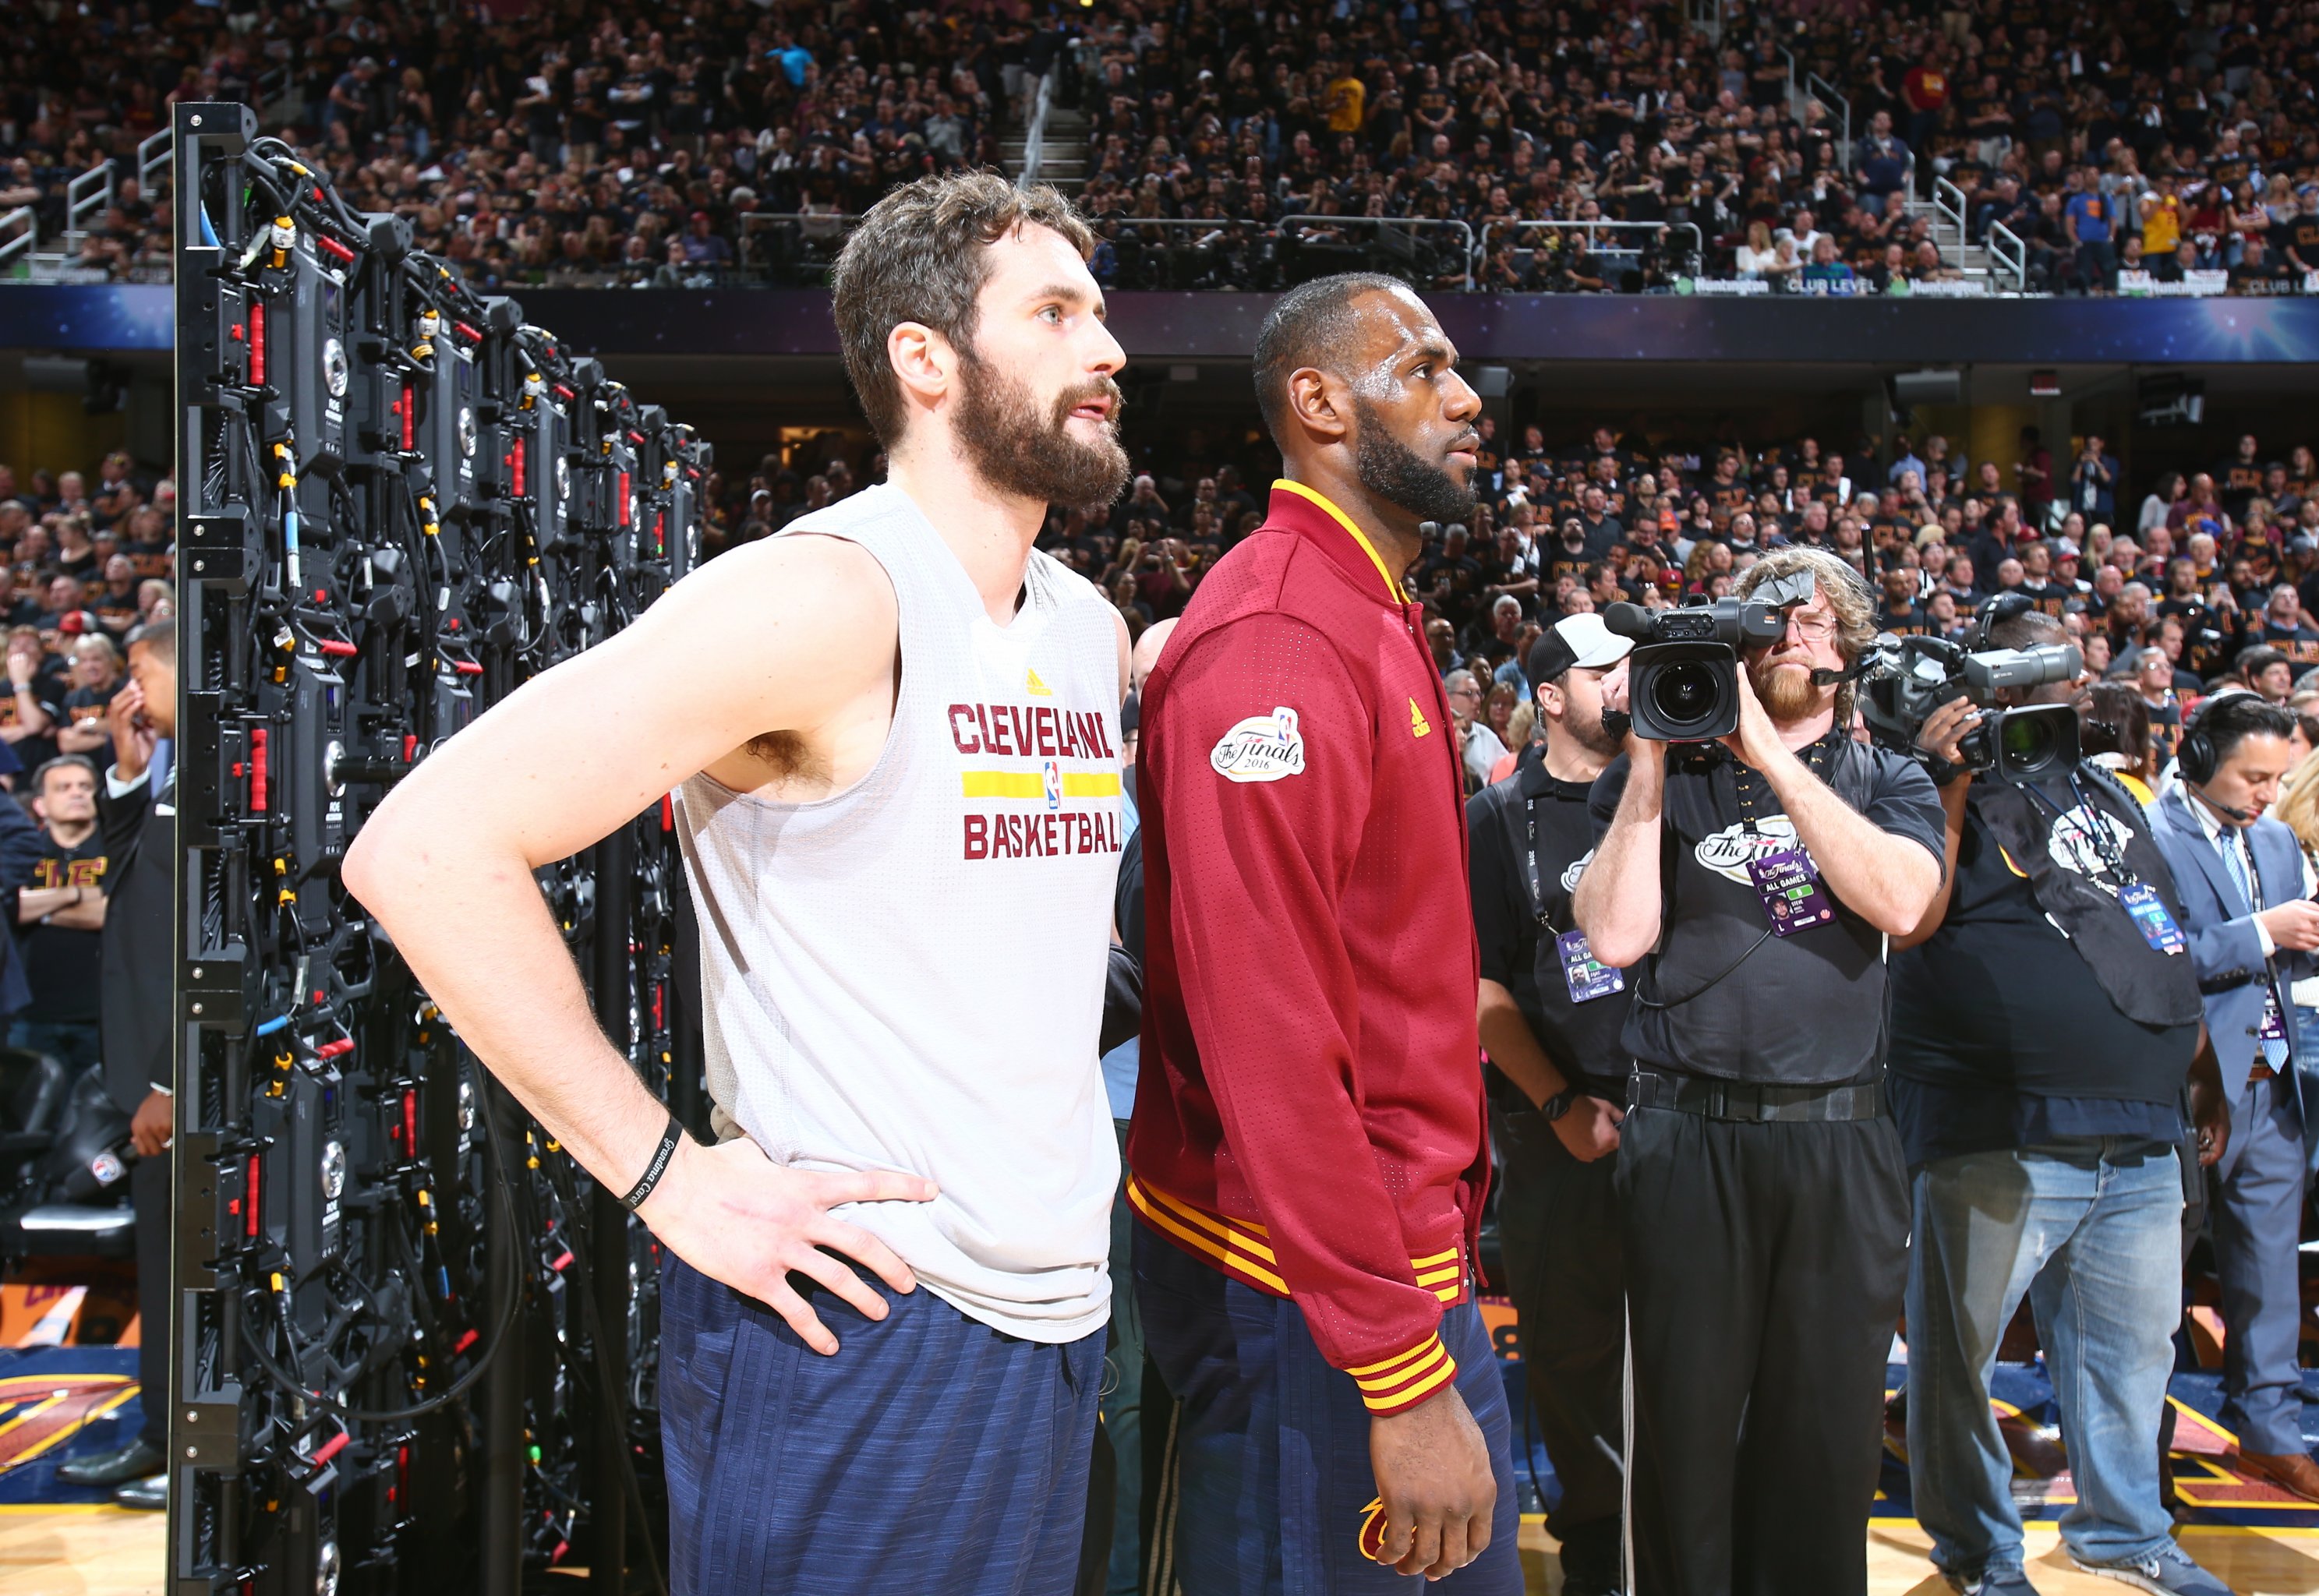 It's official: Kevin Love is a Cleveland Cavalier - Fear The Sword